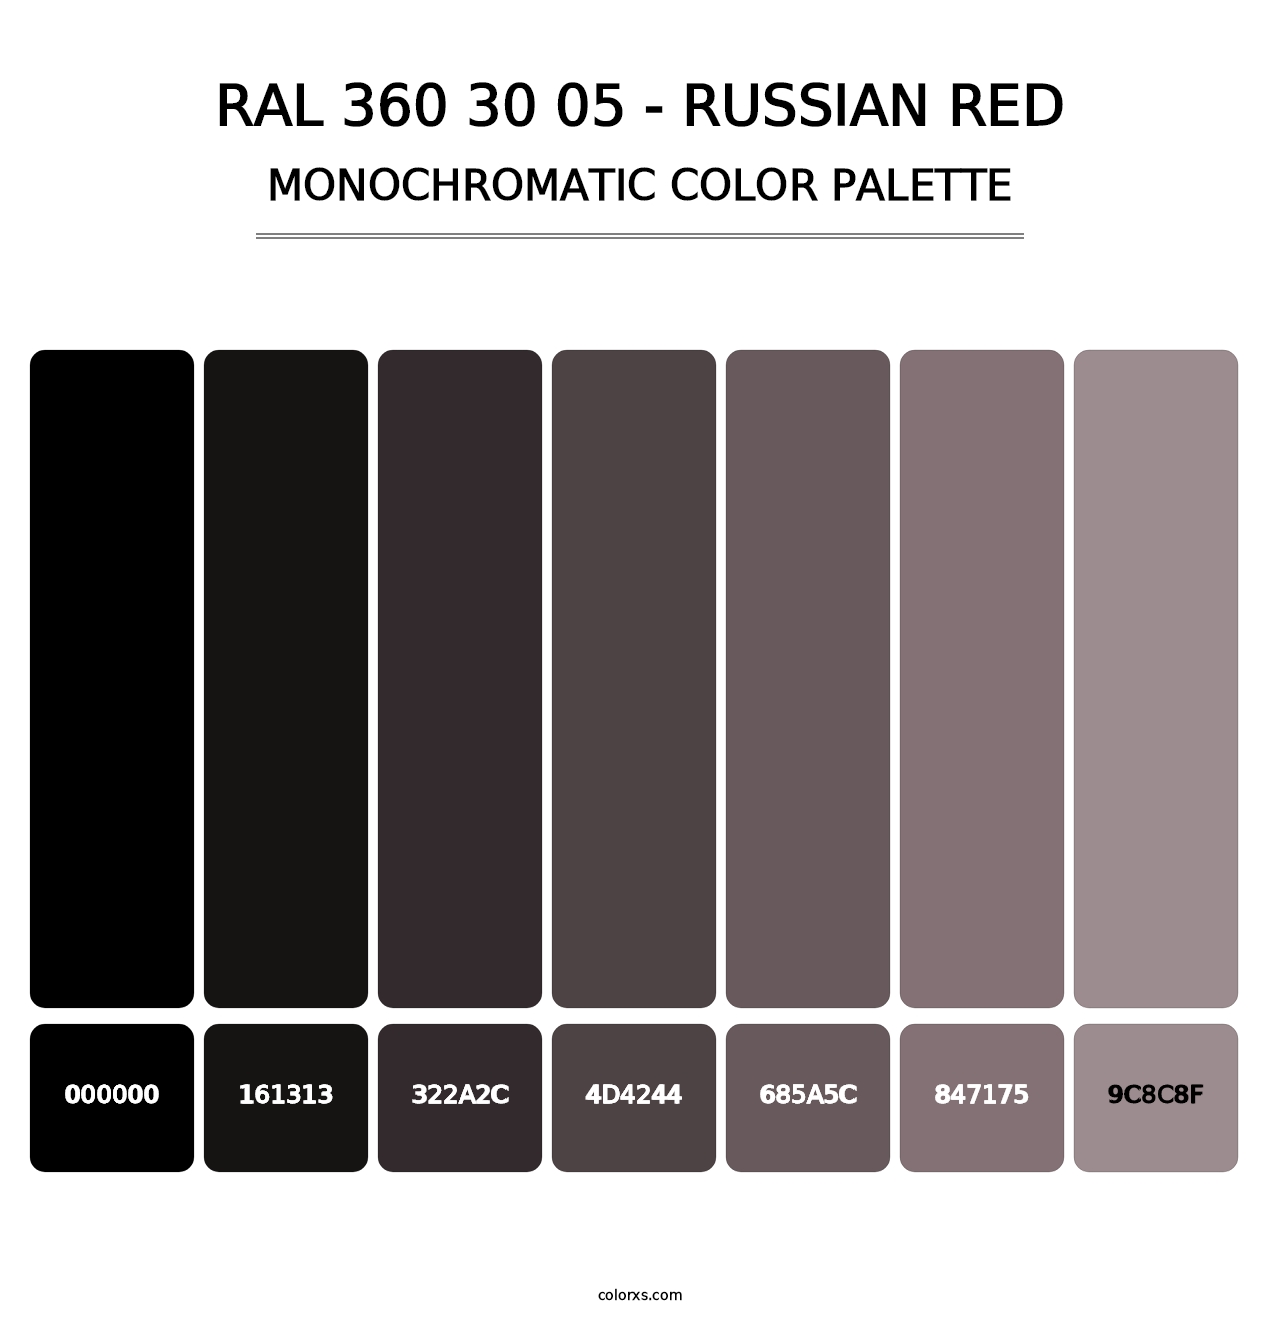 RAL 360 30 05 - Russian Red - Monochromatic Color Palette